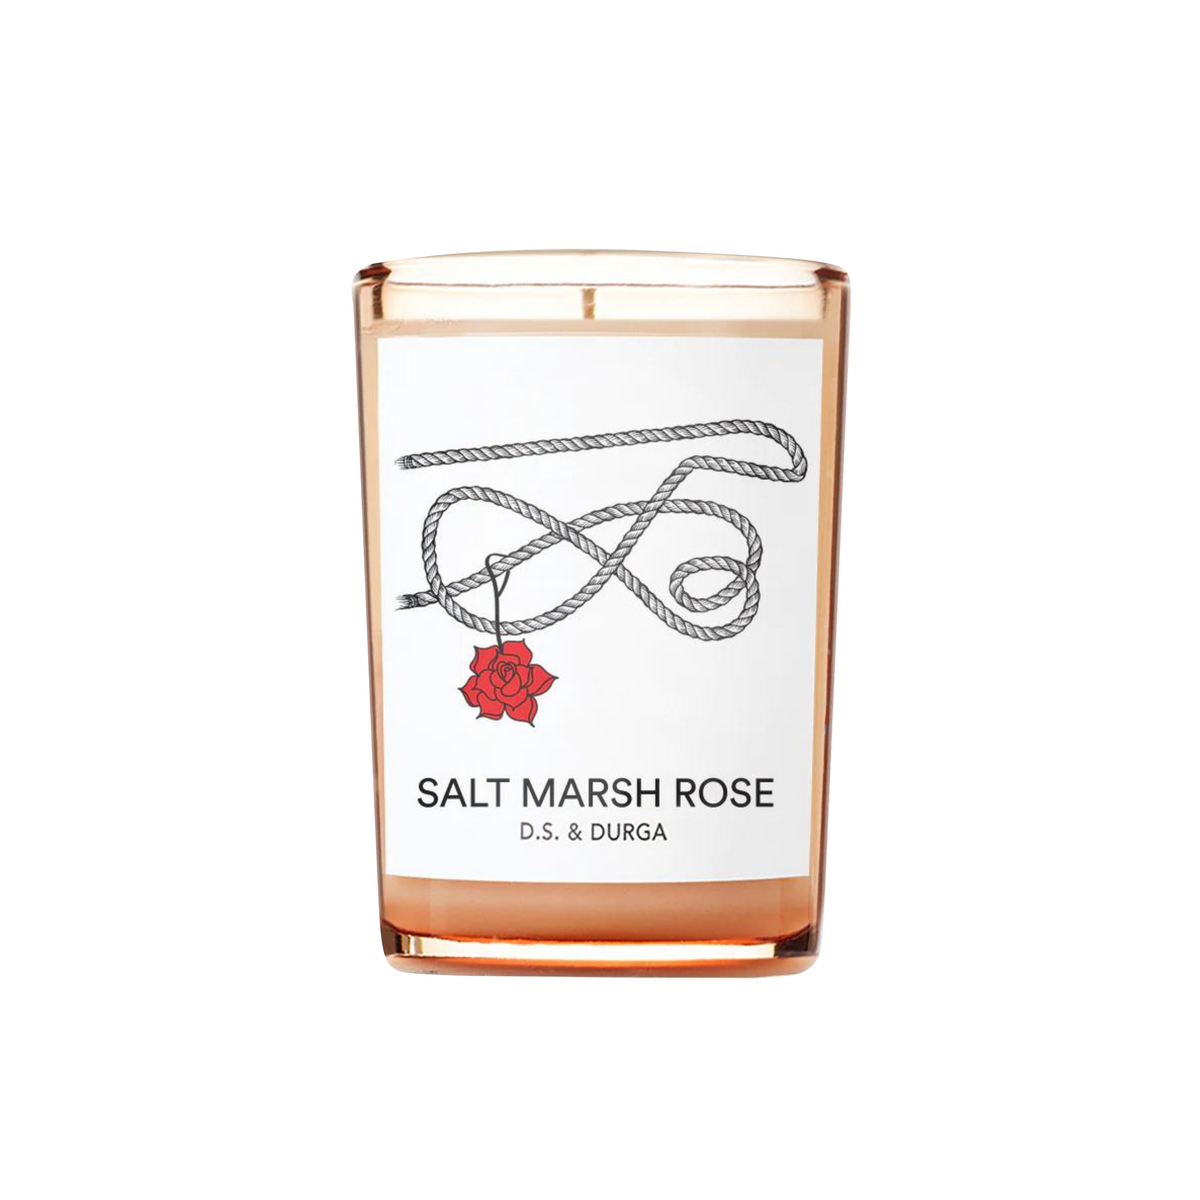 Primary Image of Salt Marsh Rose Candle